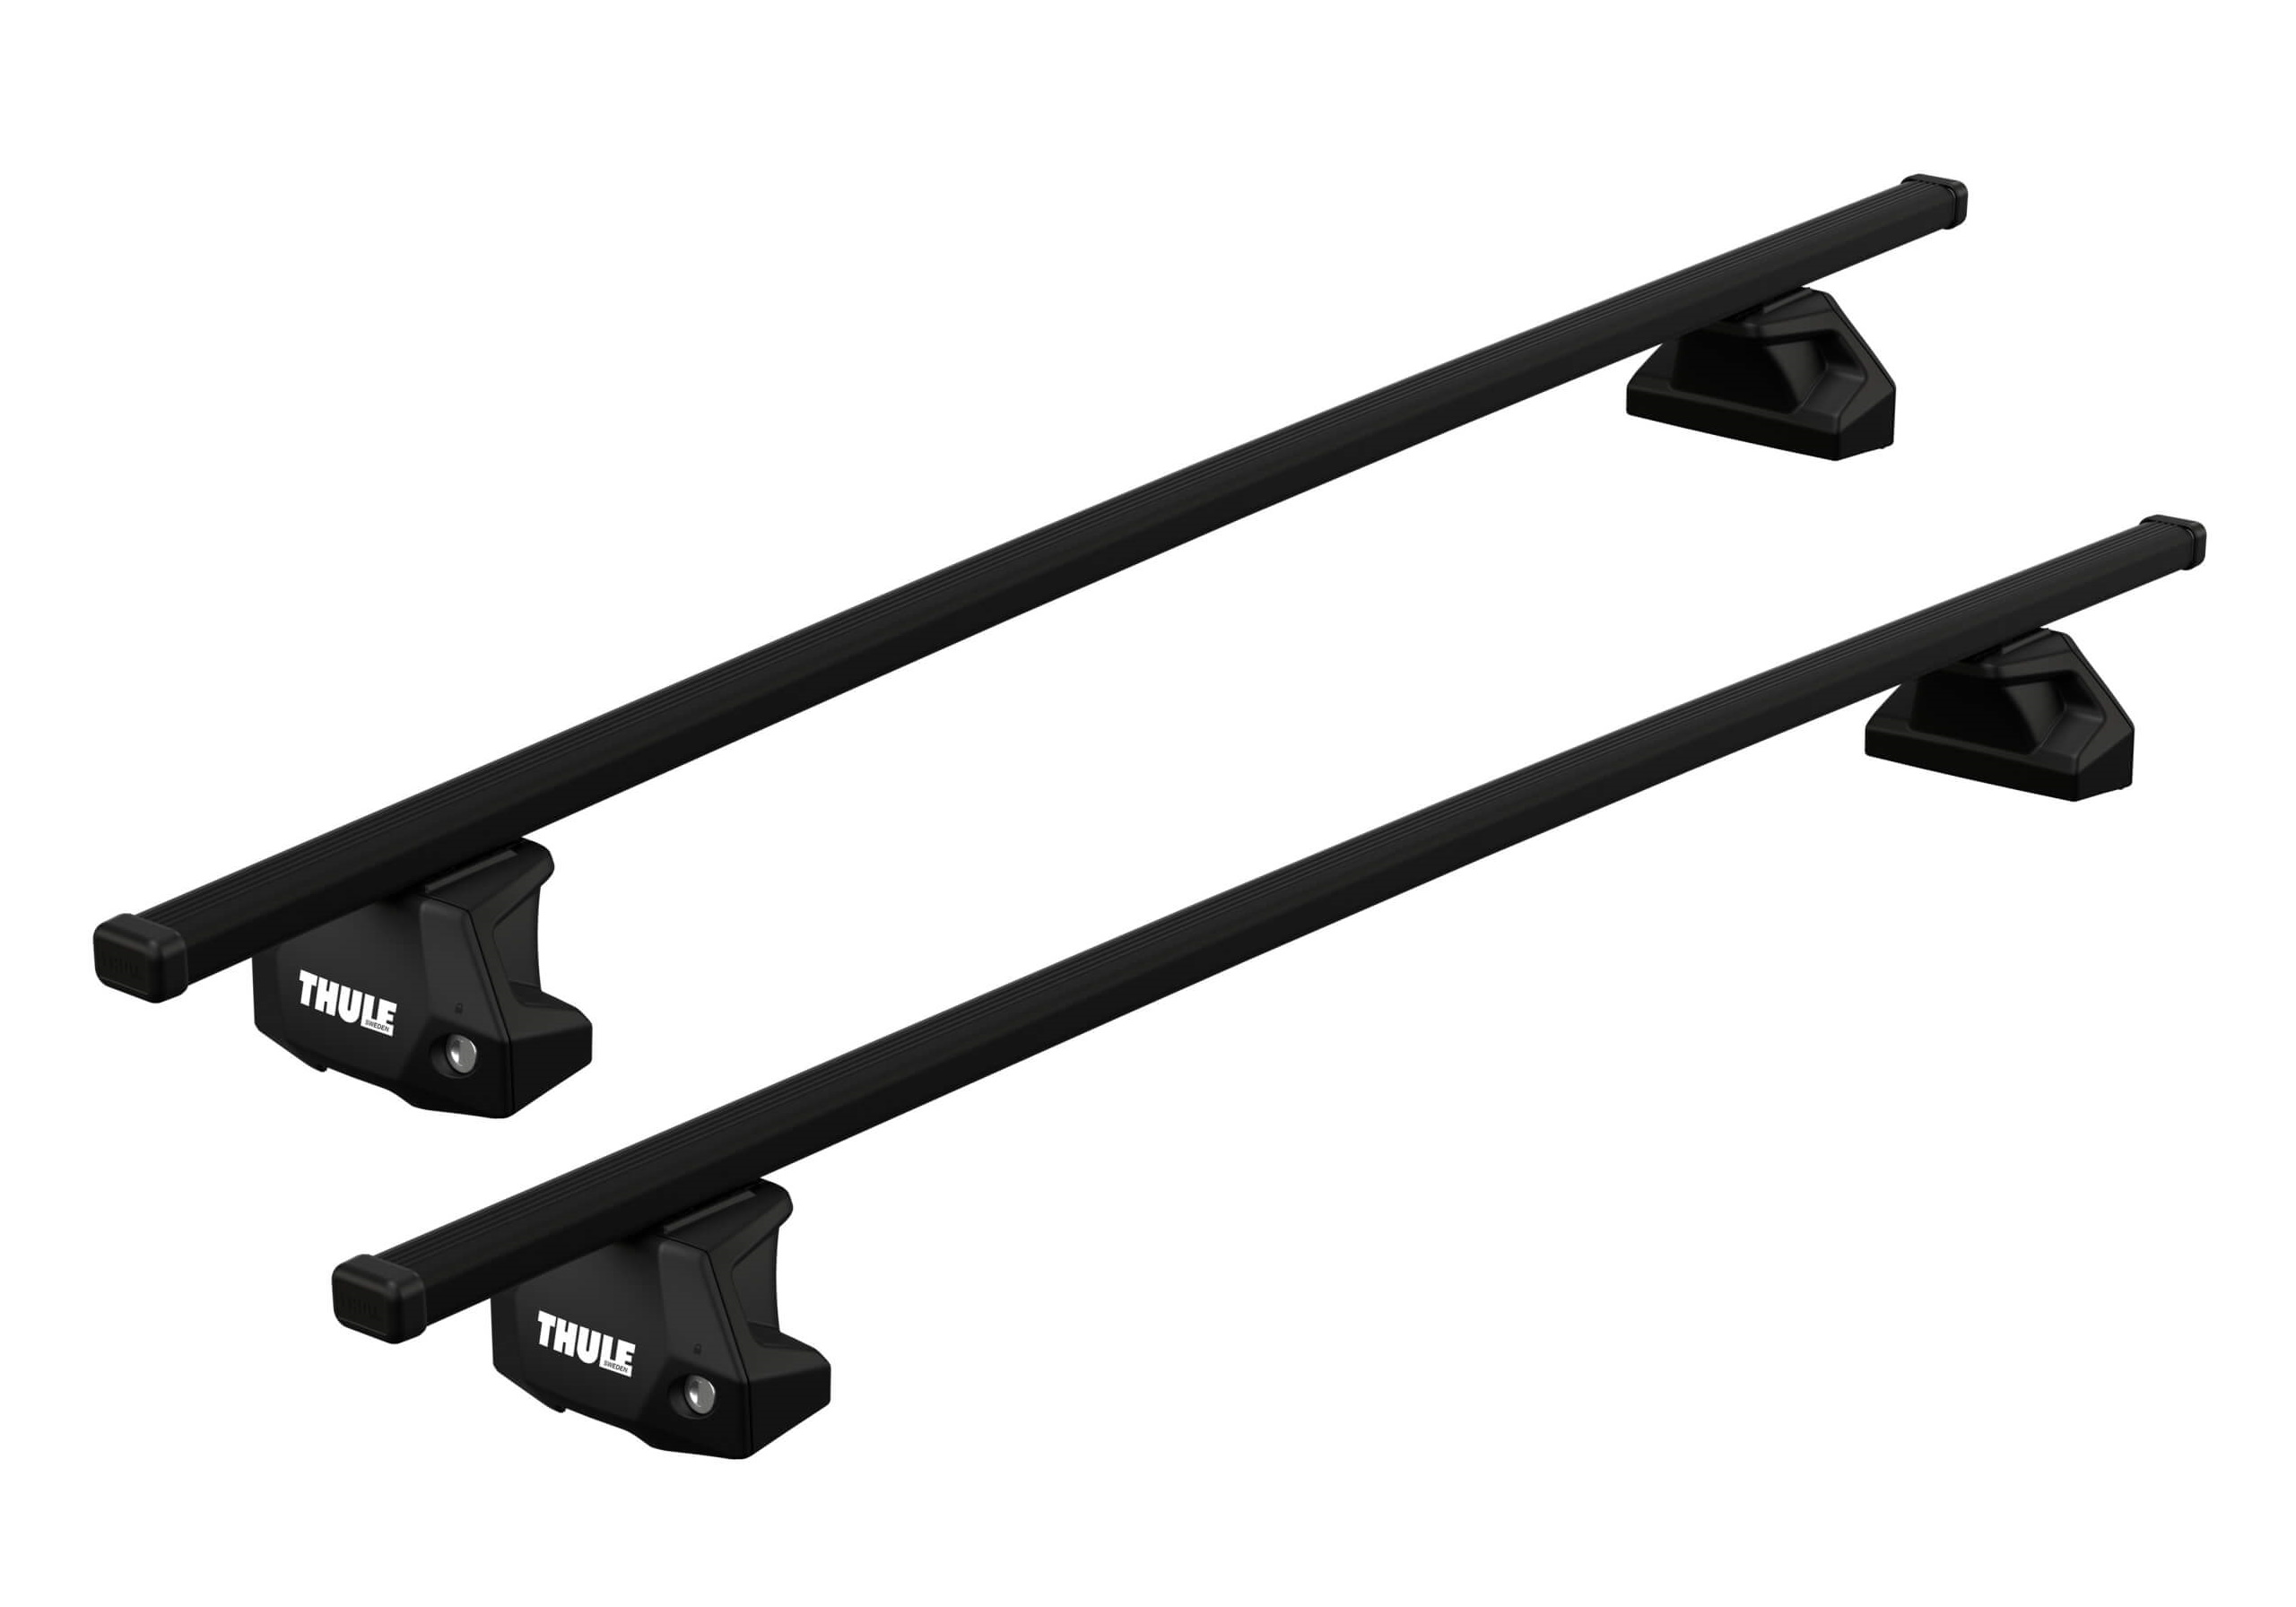 Ford Focus estate (2008 to 2011):Thule SquareBars package - 7107, 7123, 7087